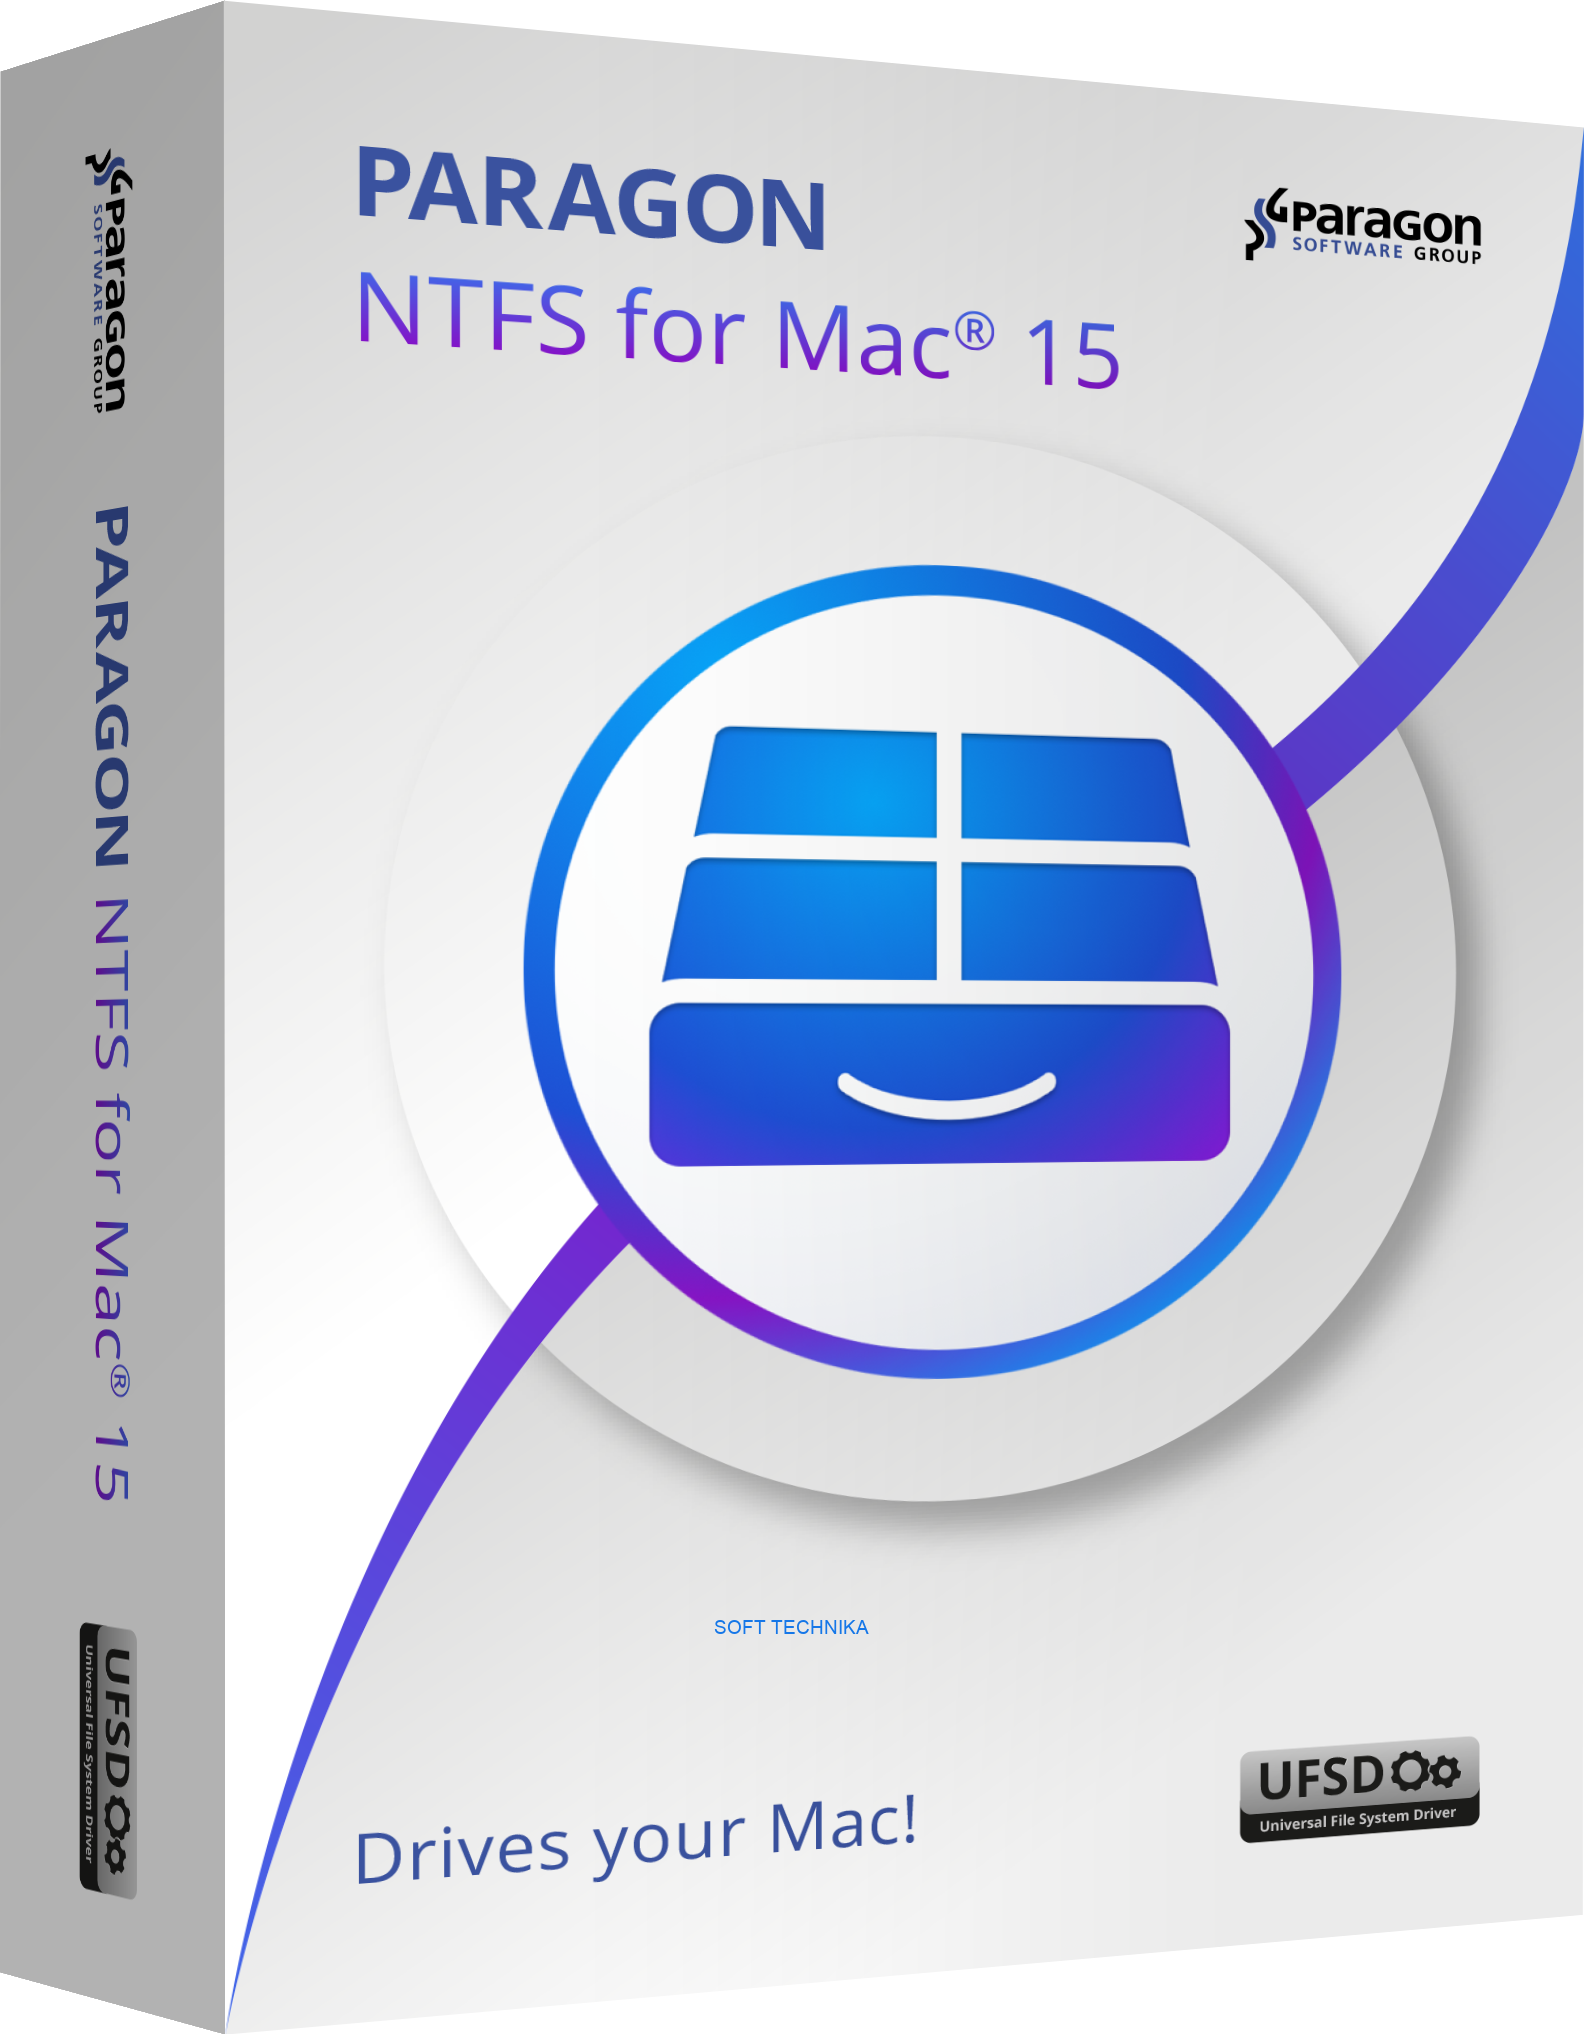 What Is Paragon Ntfs For Mac Os X